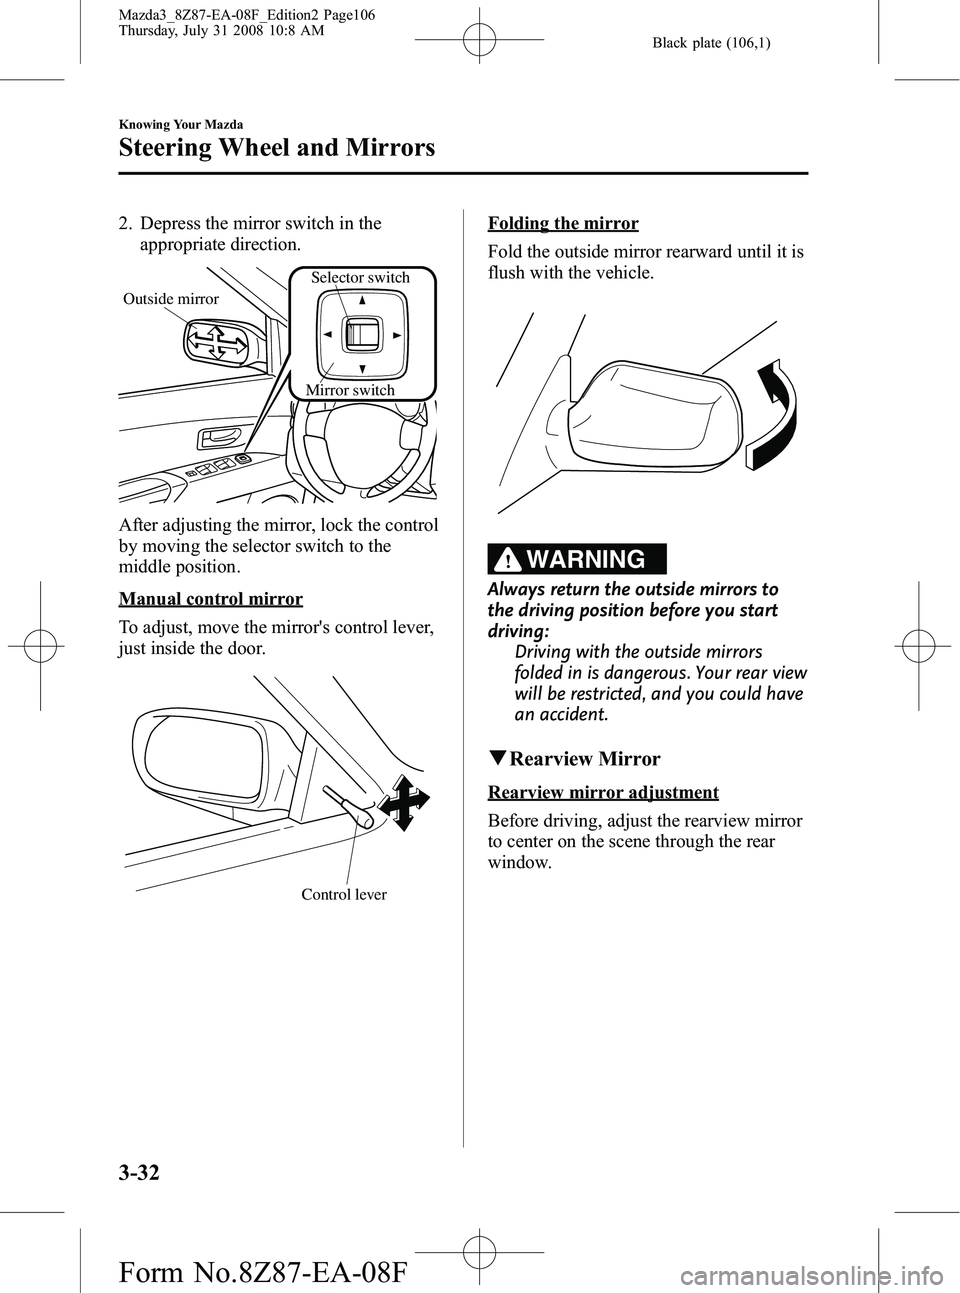 MAZDA MODEL 3 4-DOOR 2009  Owners Manual Black plate (106,1)
2. Depress the mirror switch in theappropriate direction.
Mirror switch
Outside mirror
Selector switch
After adjusting the mirror, lock the control
by moving the selector switch to